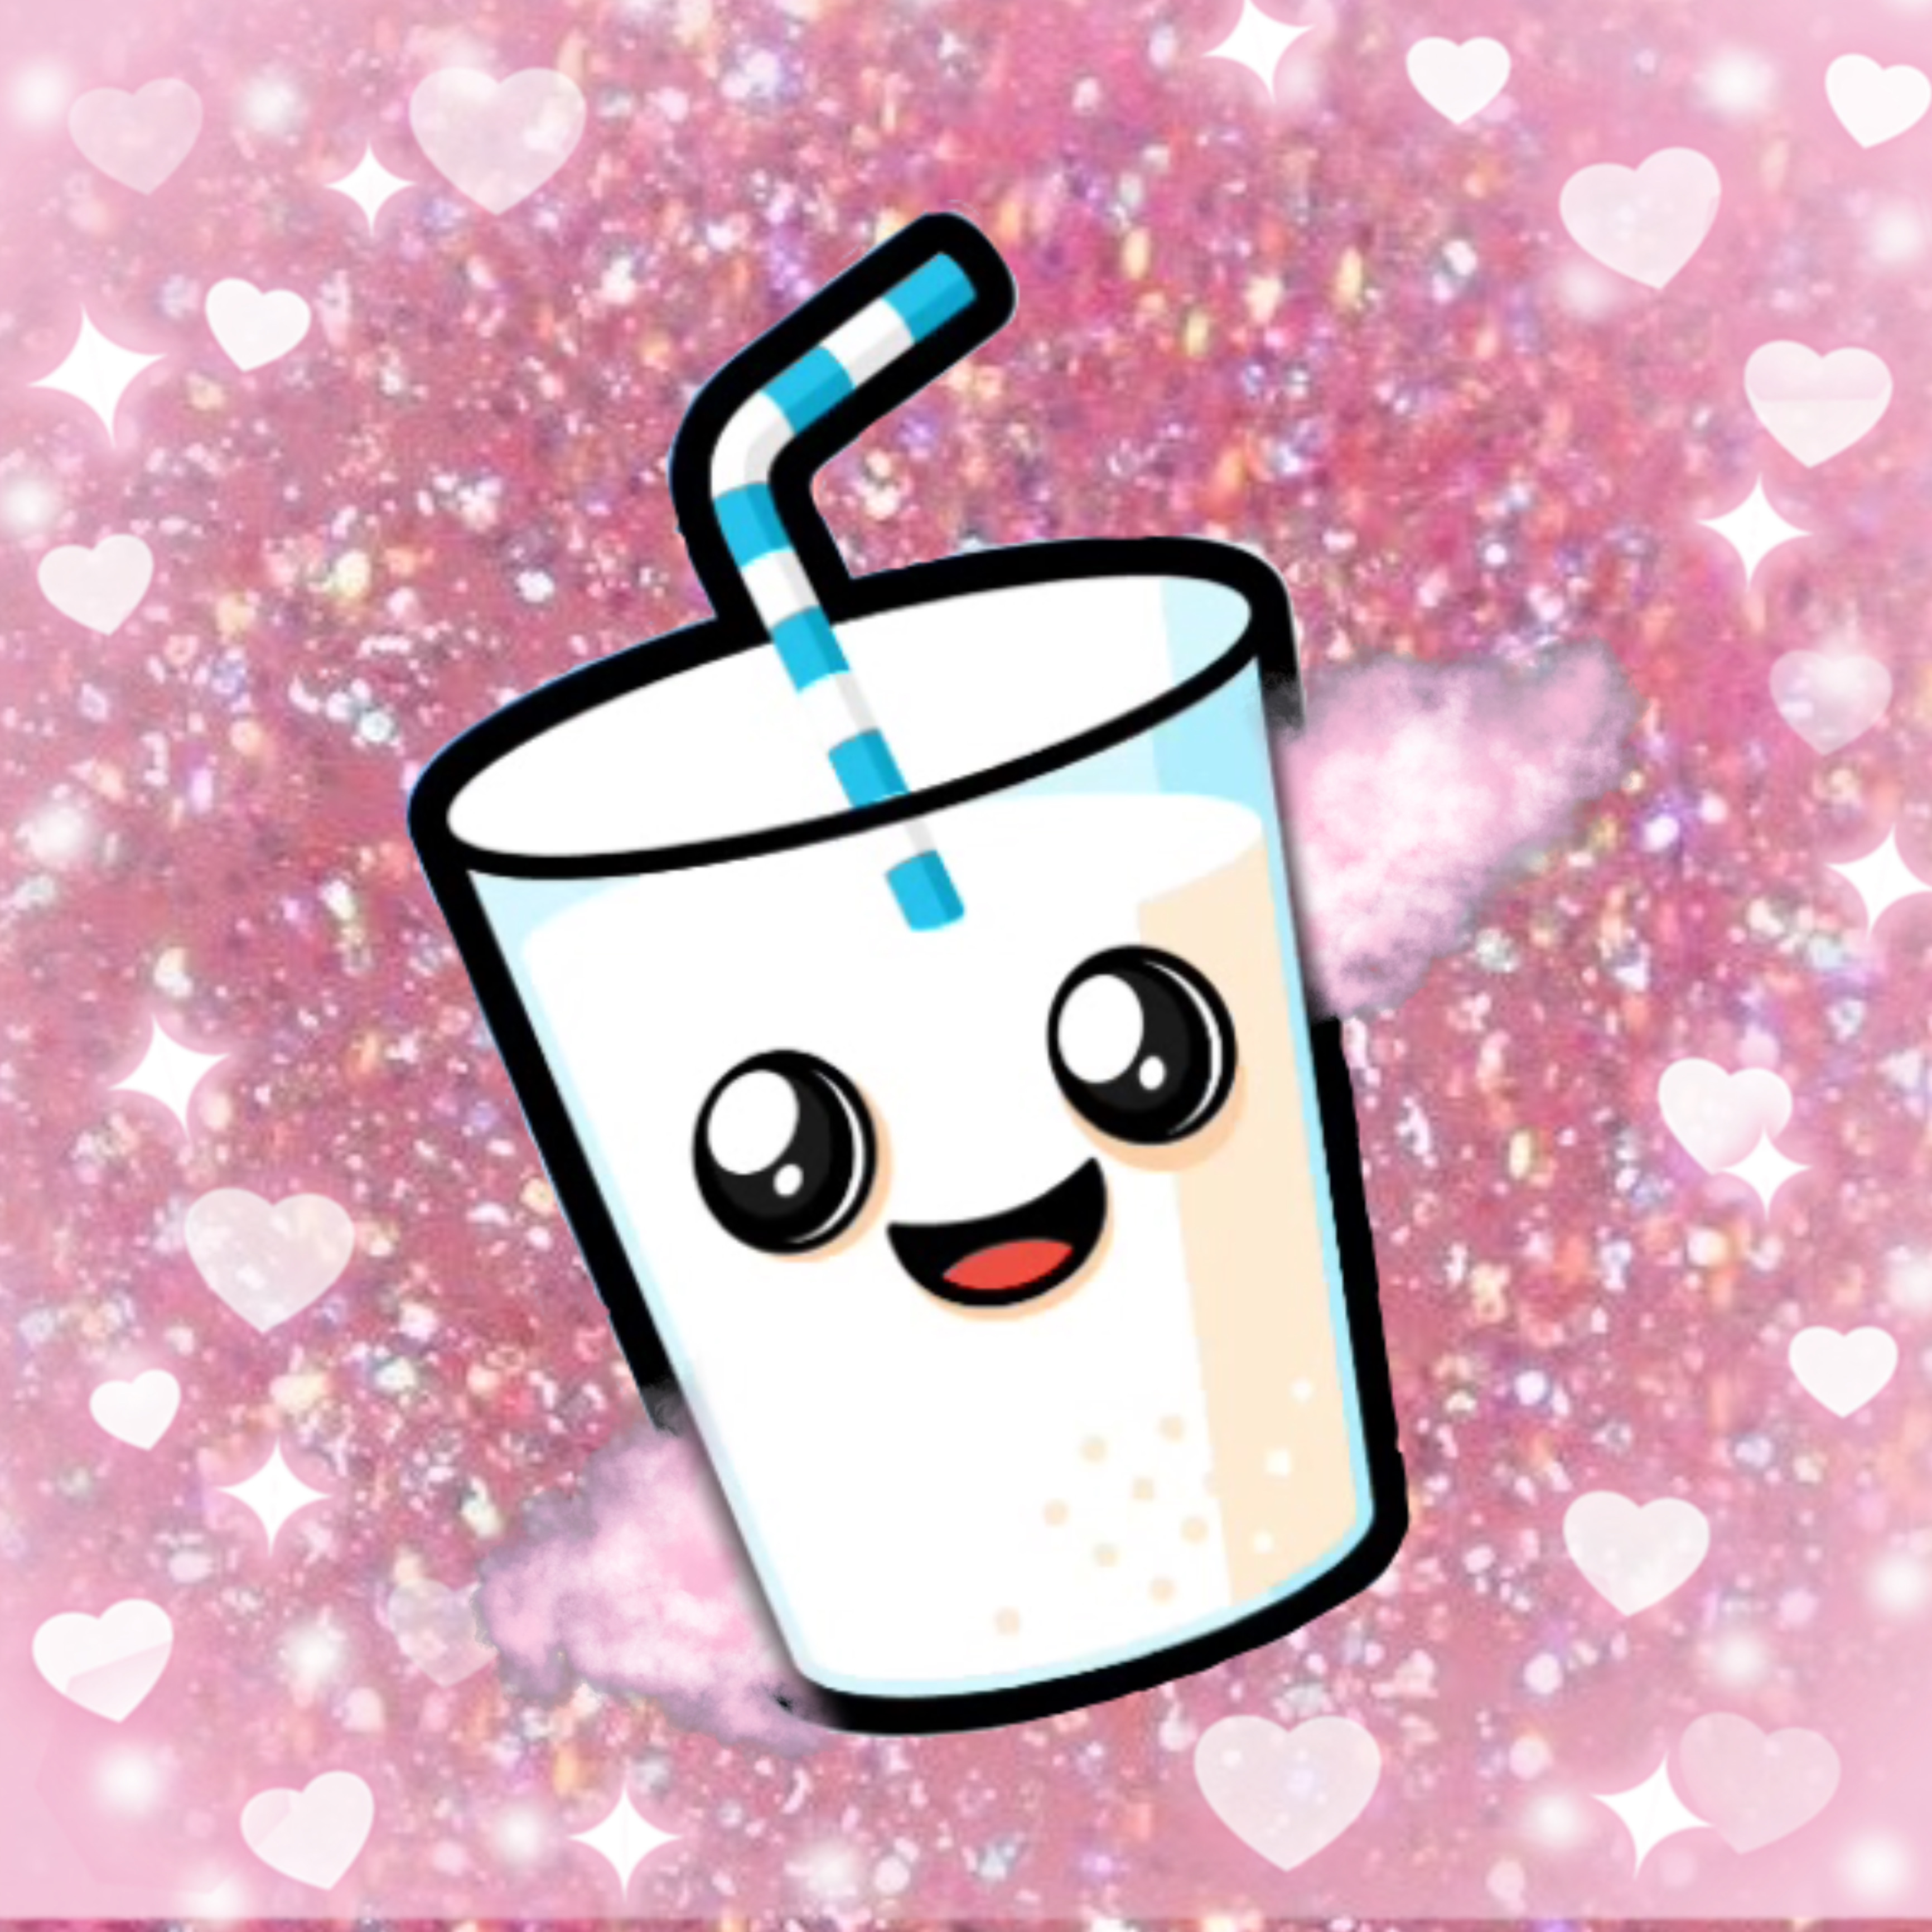 Horchata Wallpapers